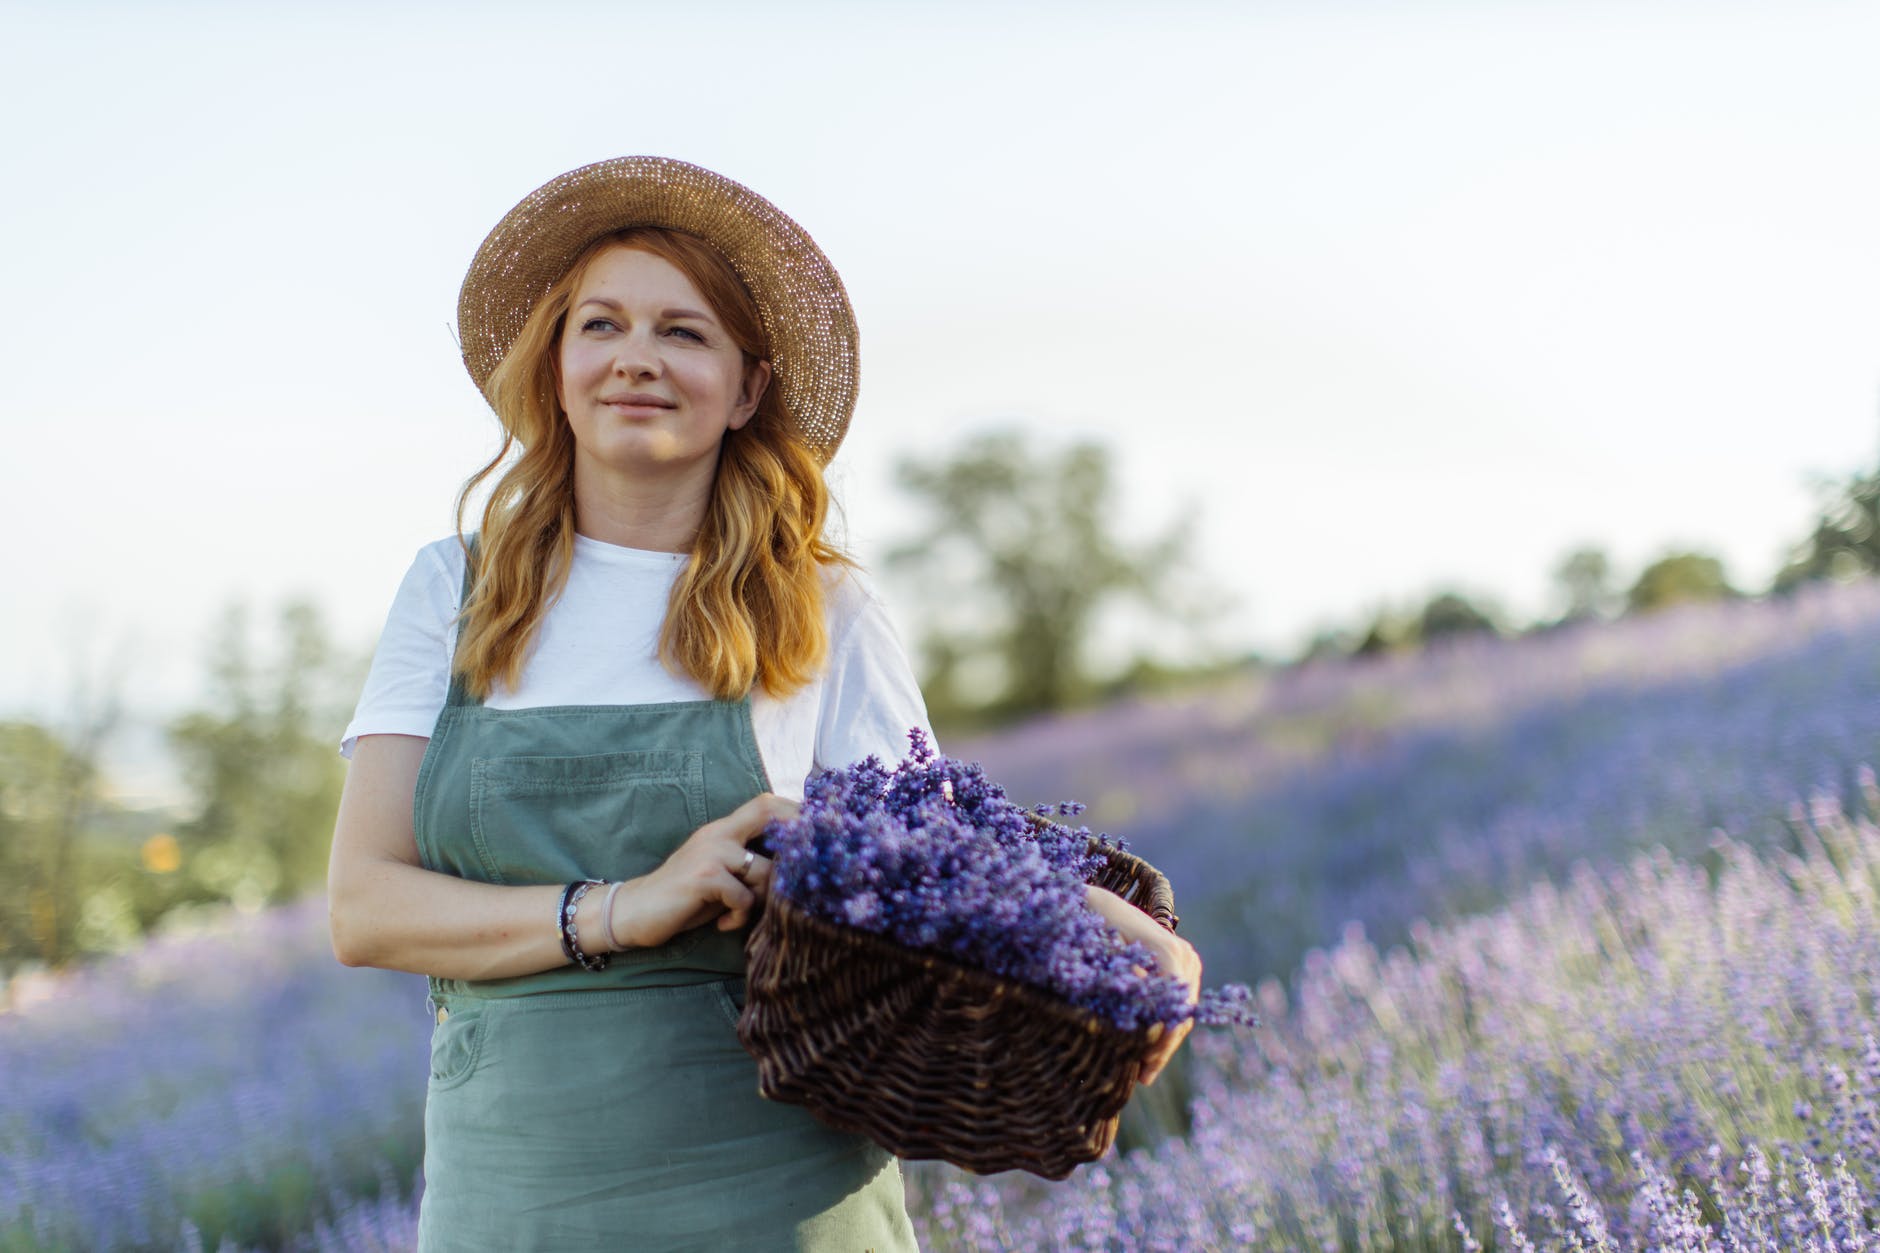 woman standing on a flower field while carrying basket full of lavender flowers